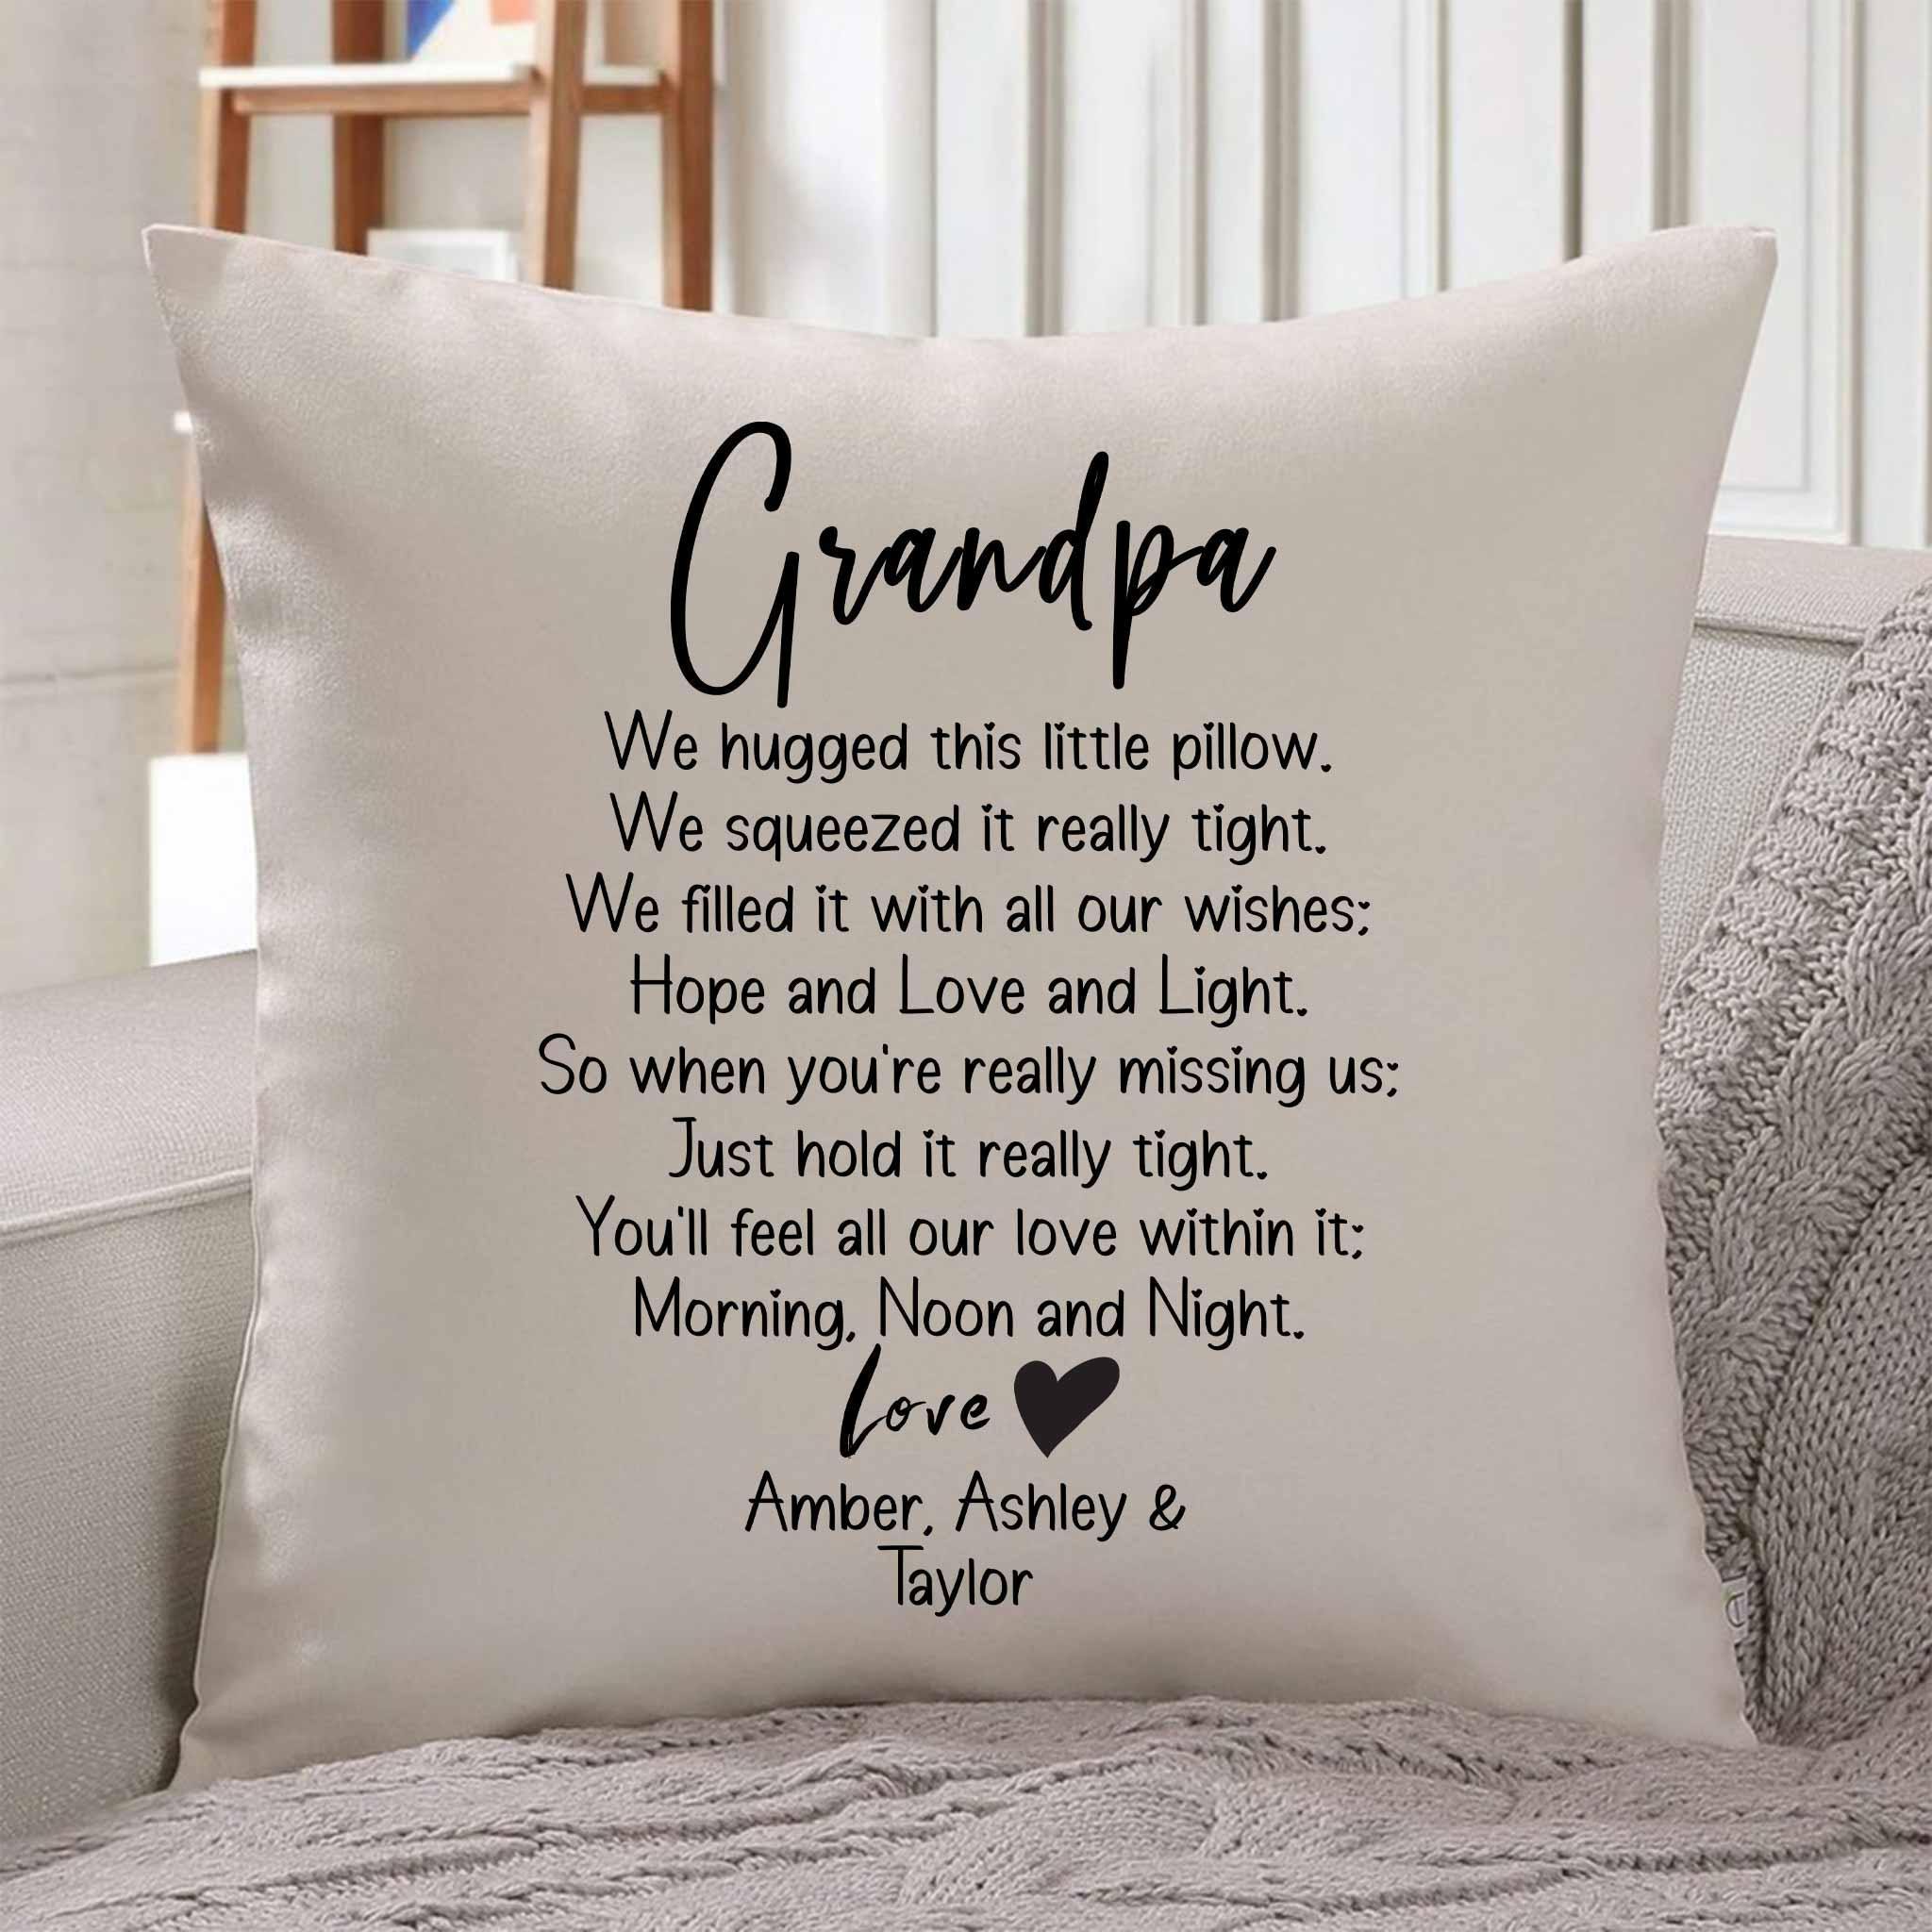 Grandpa We Hugged This Little Pillow Poem v2 Personalized Throw PillowCustomly Gifts